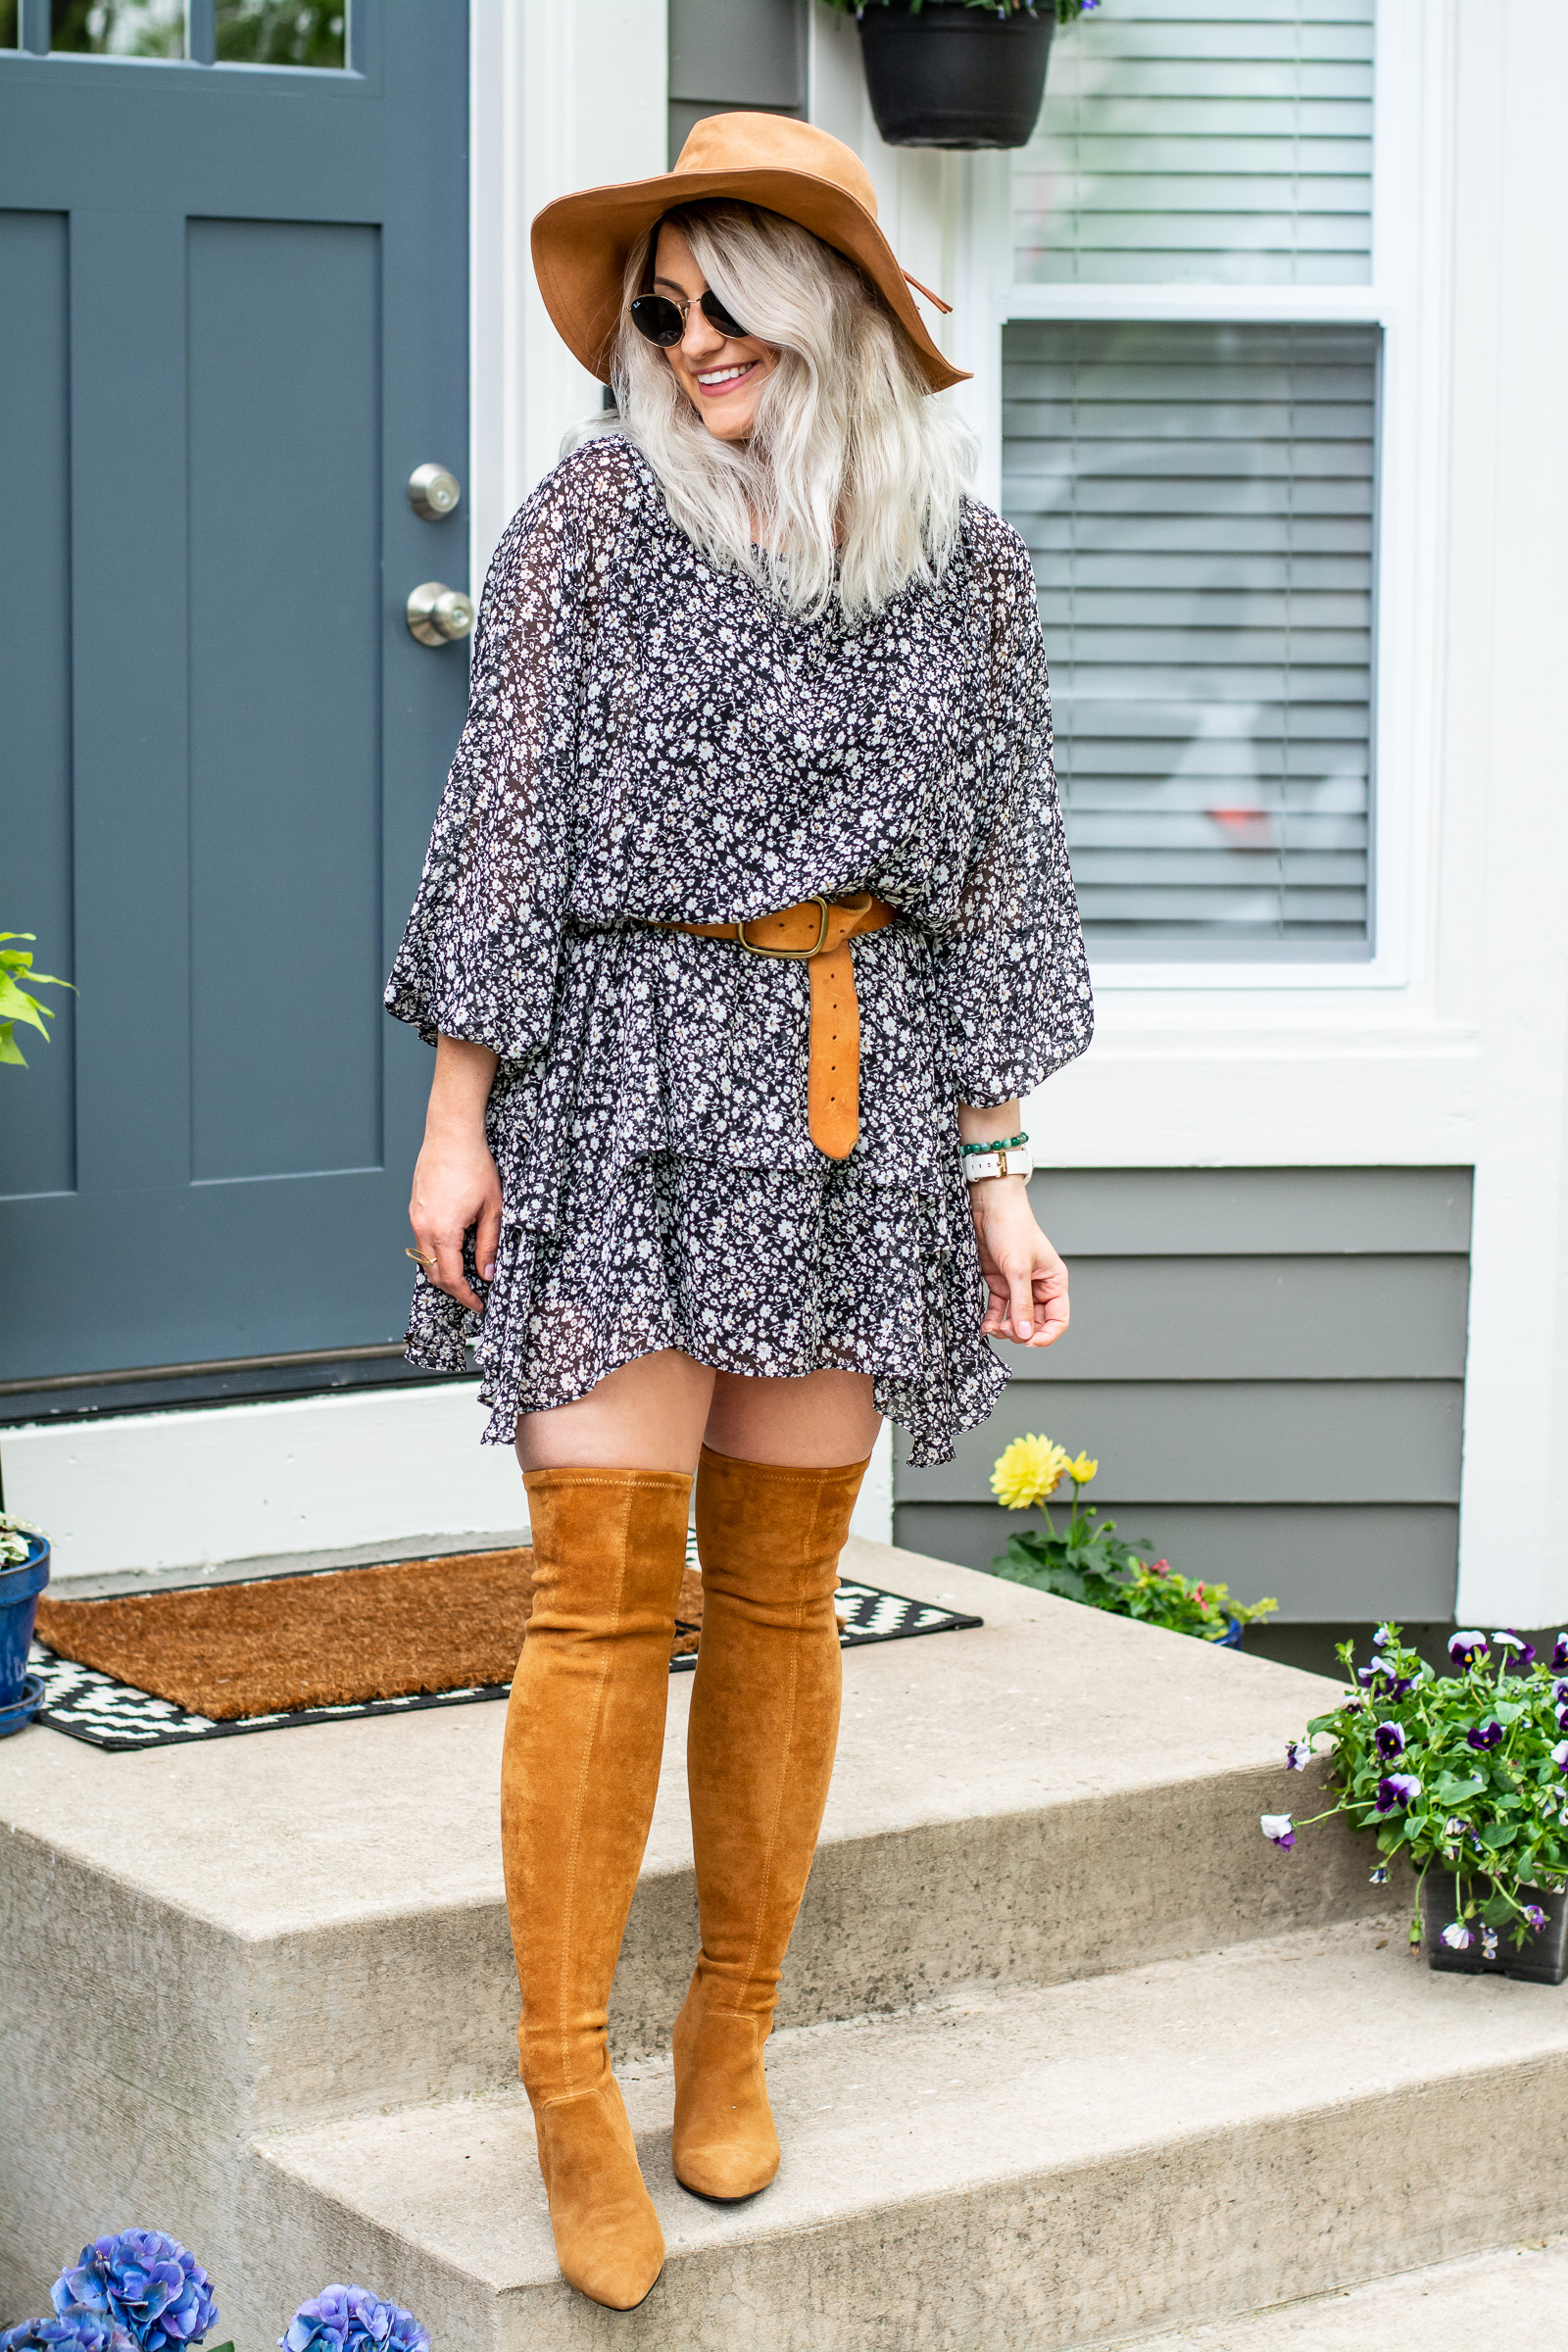 70s Boho Vibes for Spring. | Ash from LSR